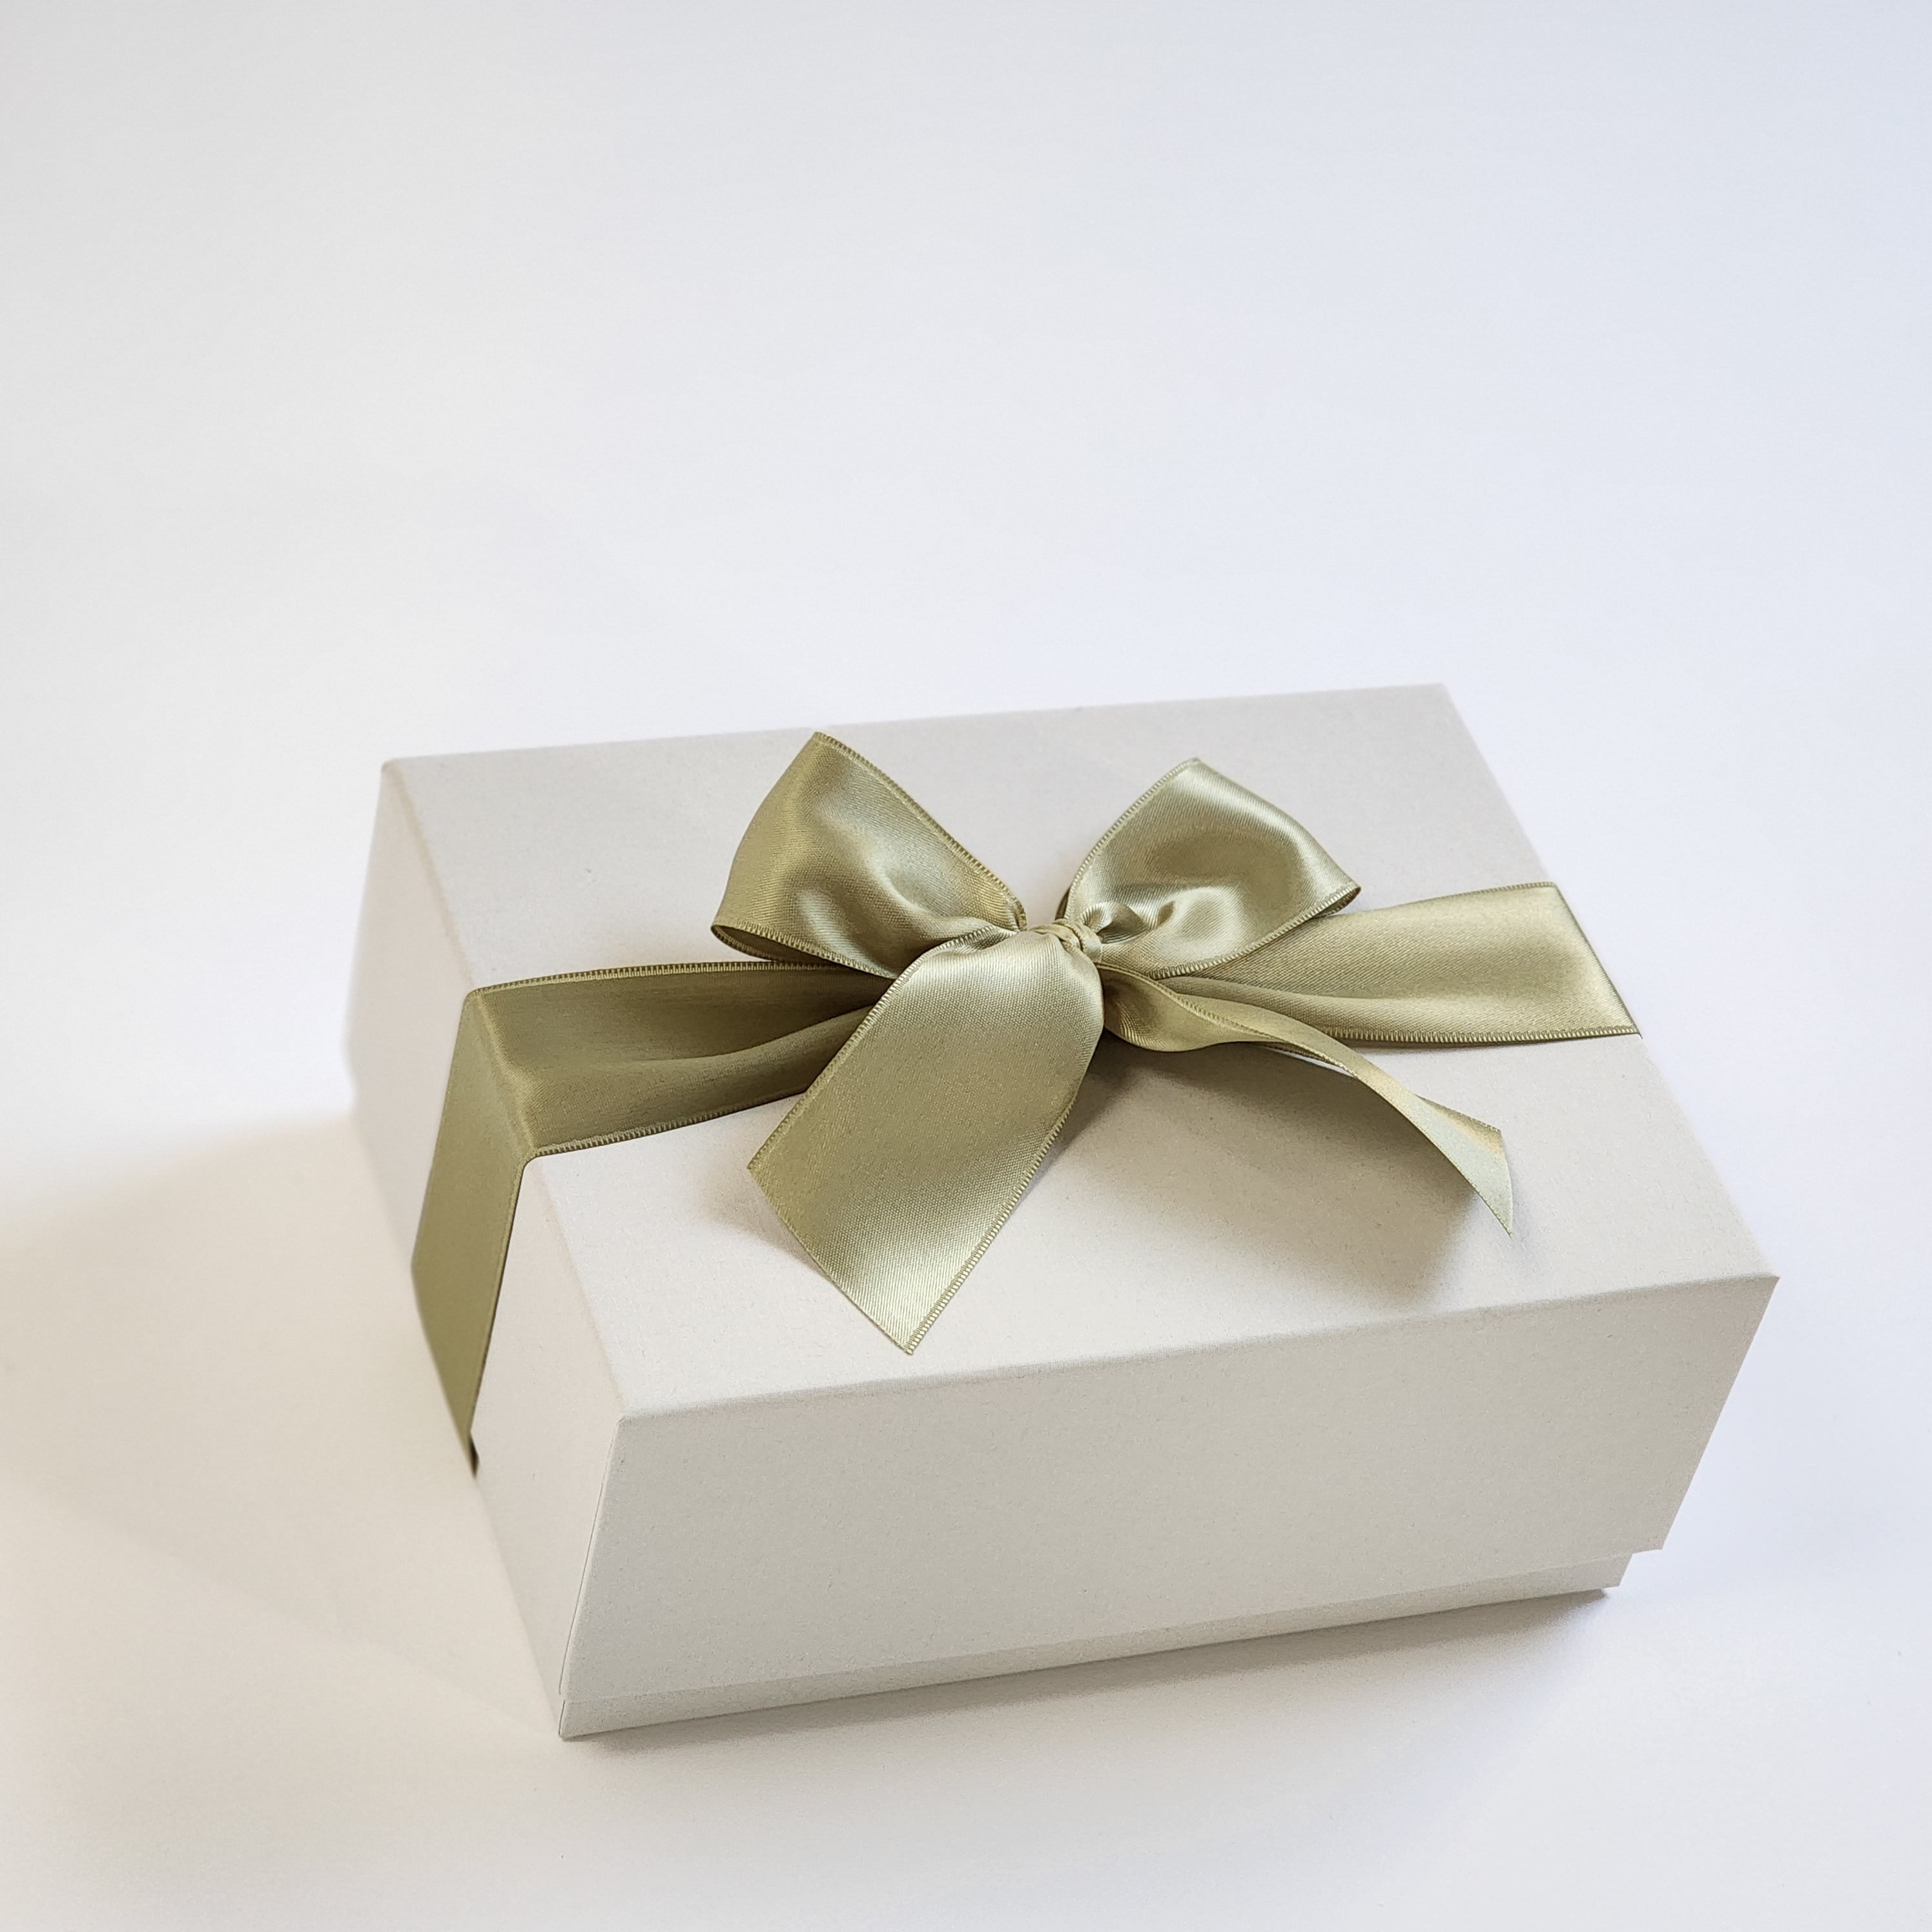 Senda Gift Box|versatile Gift Box For All Occasions - Transparent Chocolate  Carton For Weddings & Parties